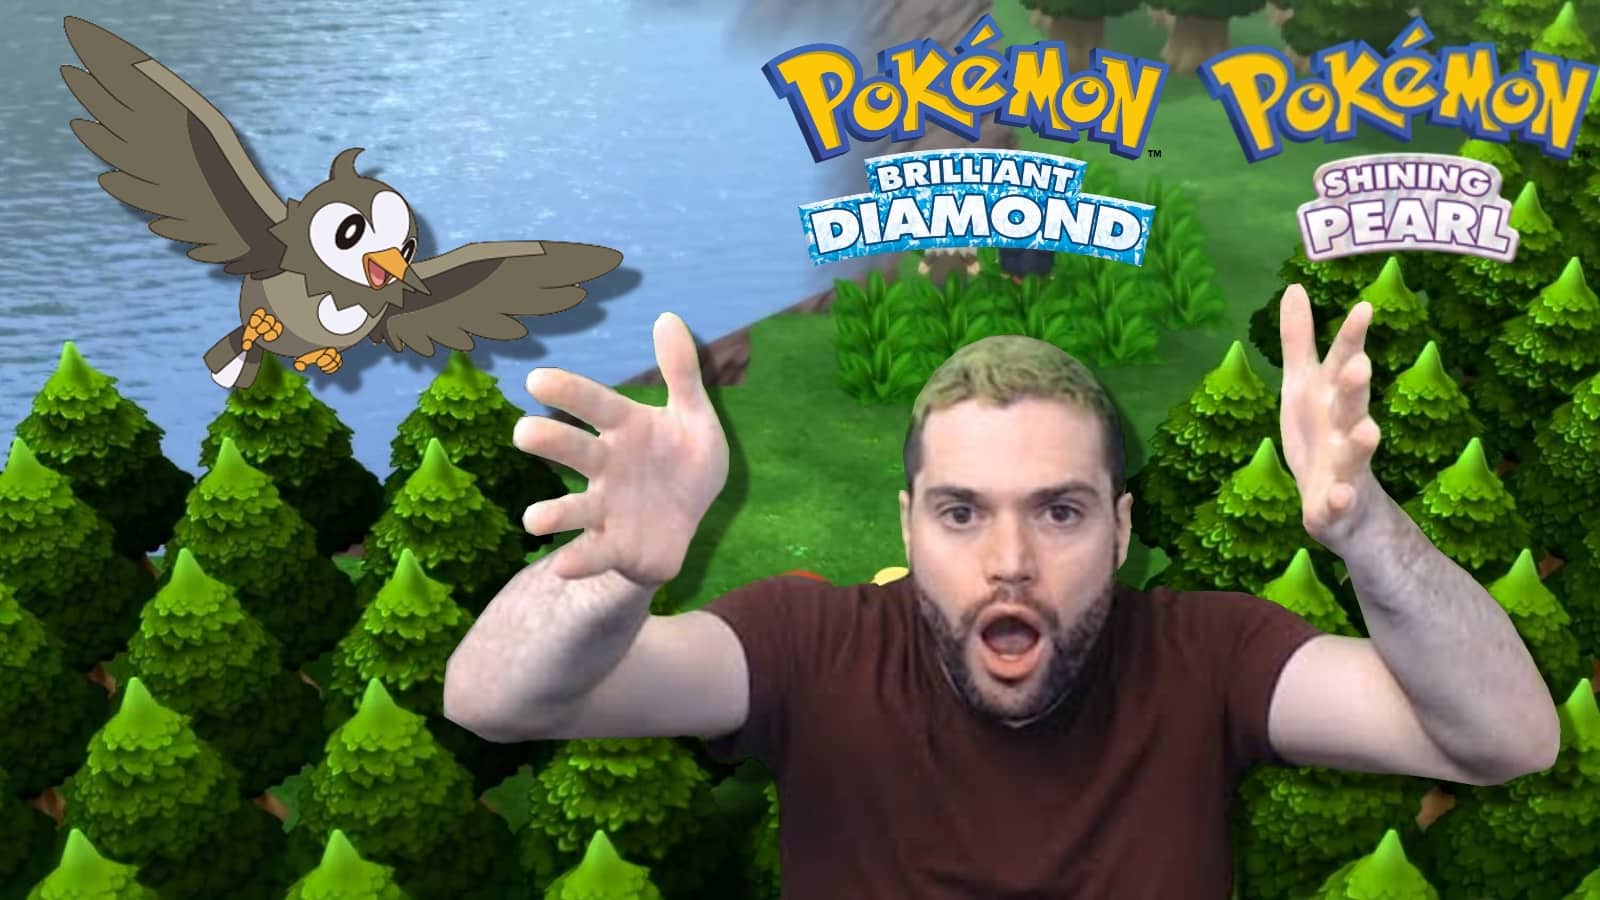 Excitement With A Slight Disappointment, Pokemon Brilliant Diamond